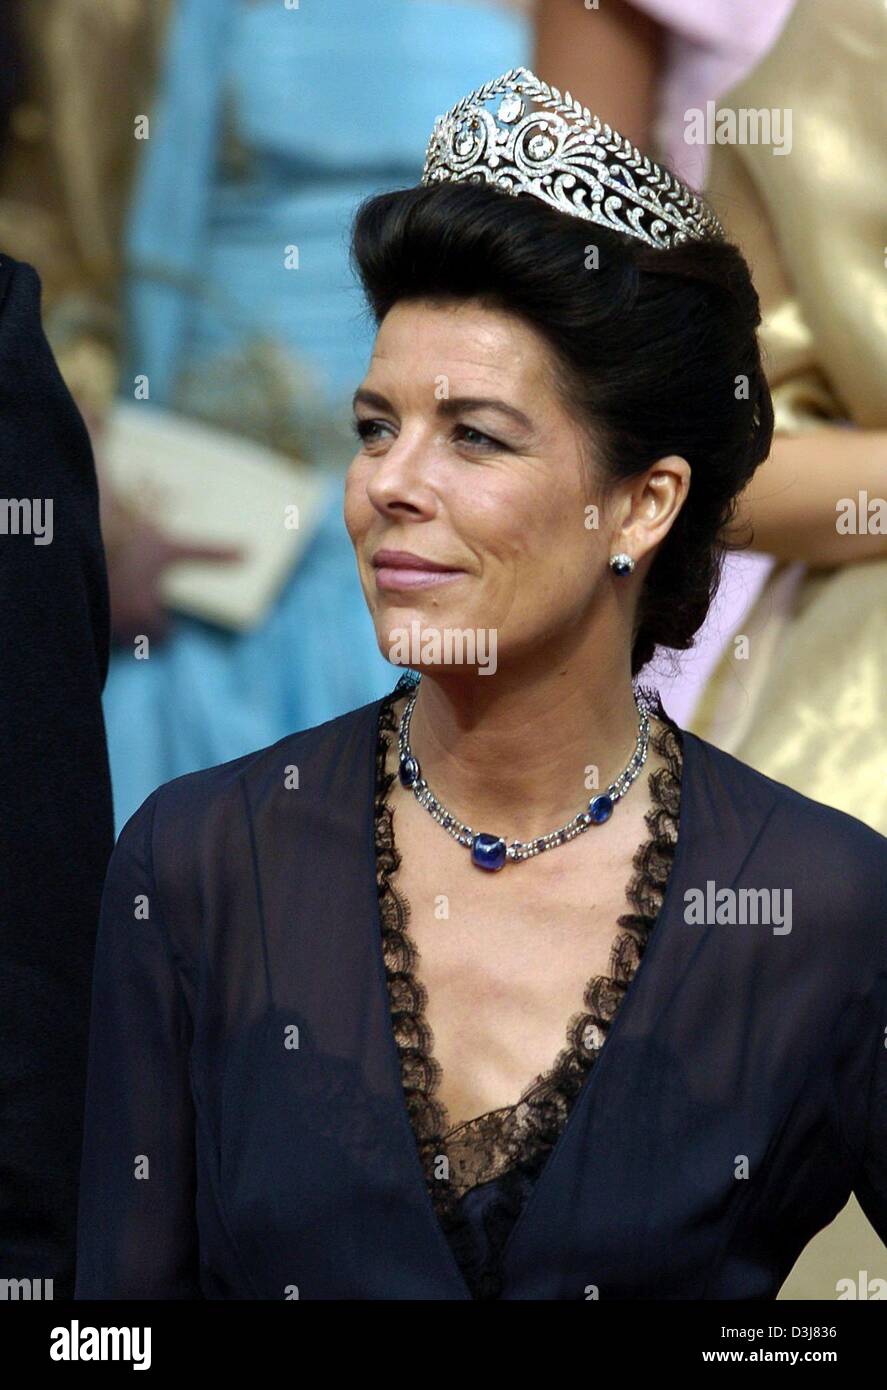 (dpa) - Princess Caroline of Monaco smiles on her arrival to the wedding of Danish crown prince Frederik and Mary Donaldson at the cathedrale in Copenhagen, Denmark, Friday, 14 May 2004. Members of all European royal dynasties were among the 800 invited guests who attended the wedding. Stock Photo